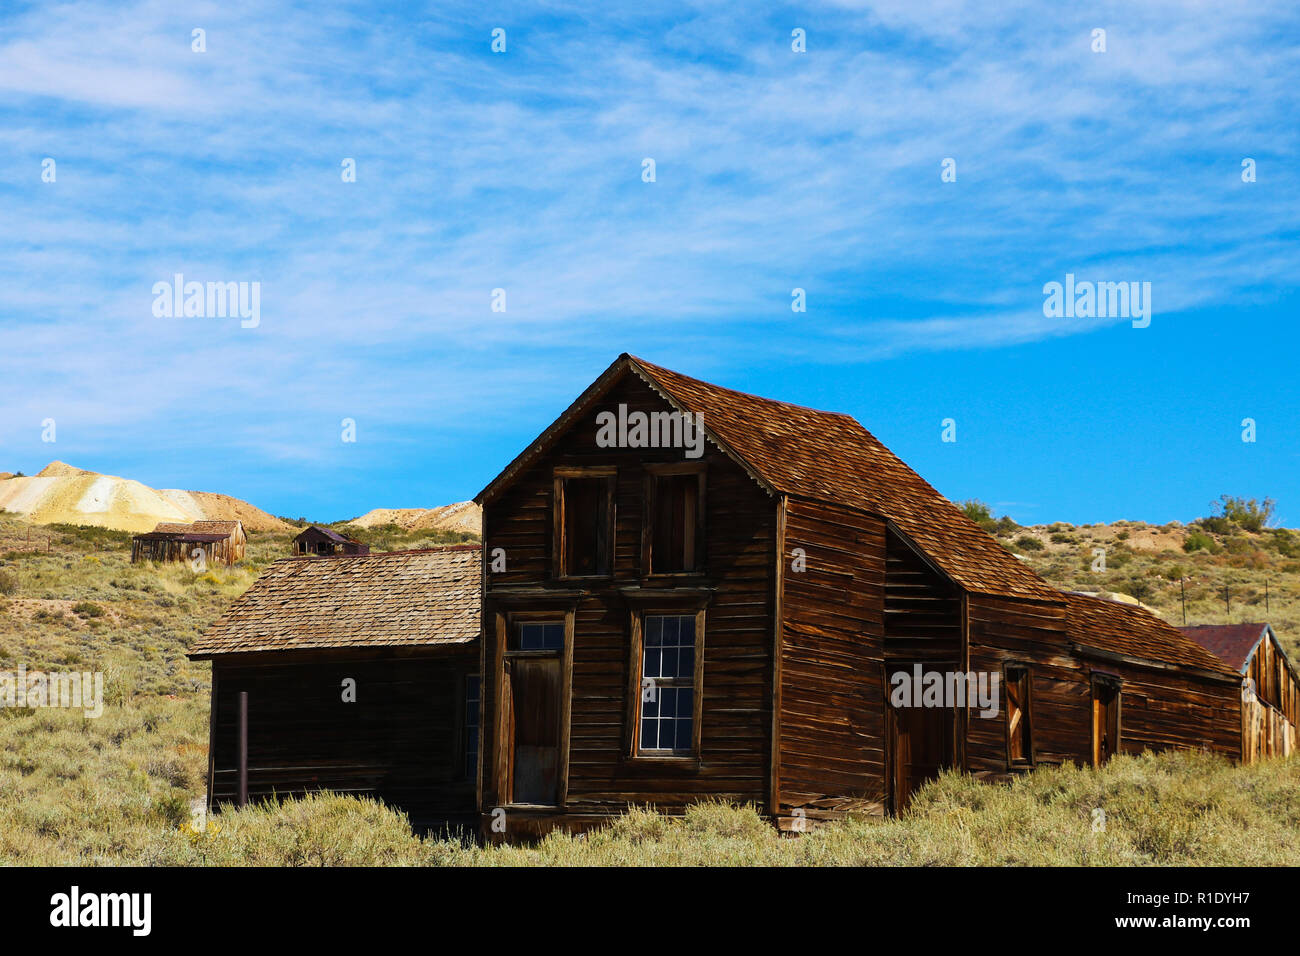 The Old Hotel An old hotel in the ghost town of Bodie, California. Horizontal. Stock Photo